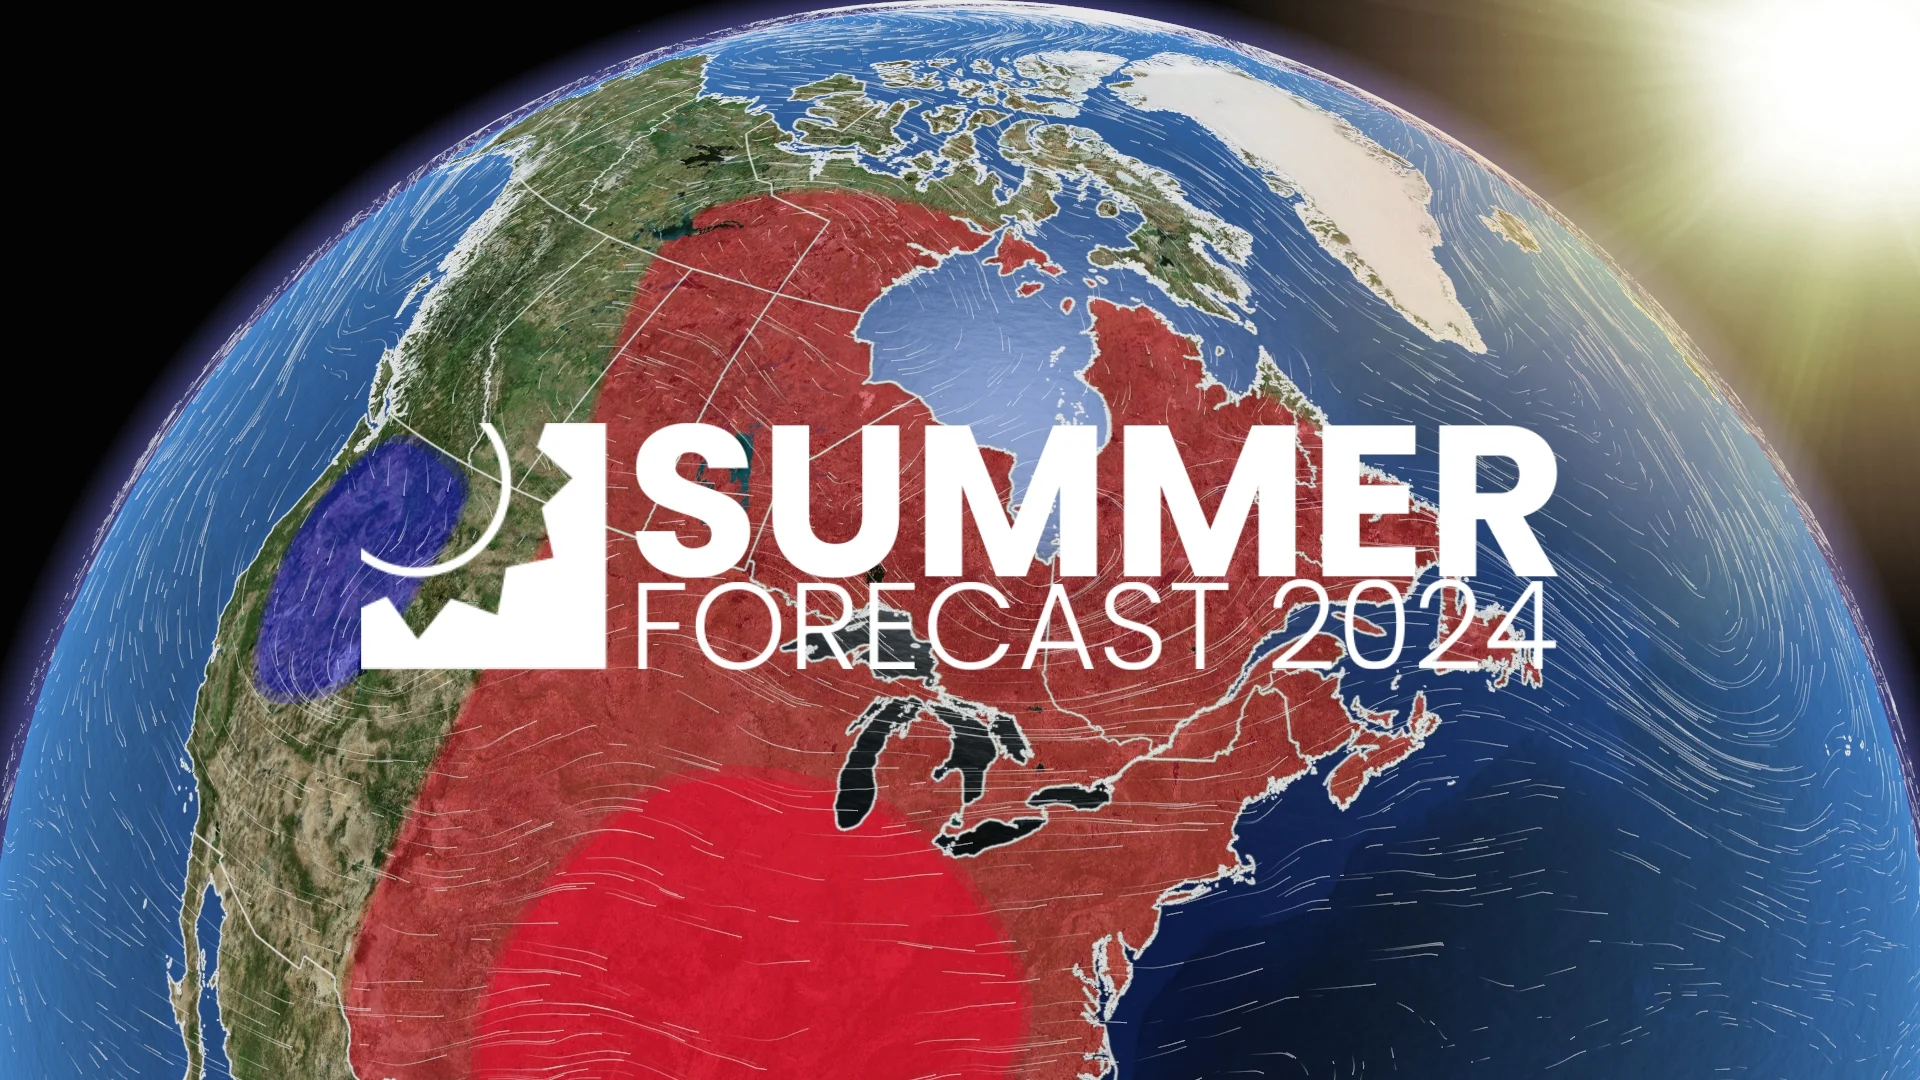 Wildfires remain a major concern in B.C. this summer, especially with periods of hot and dry weather. See what's coming in our Summer Forecast, here